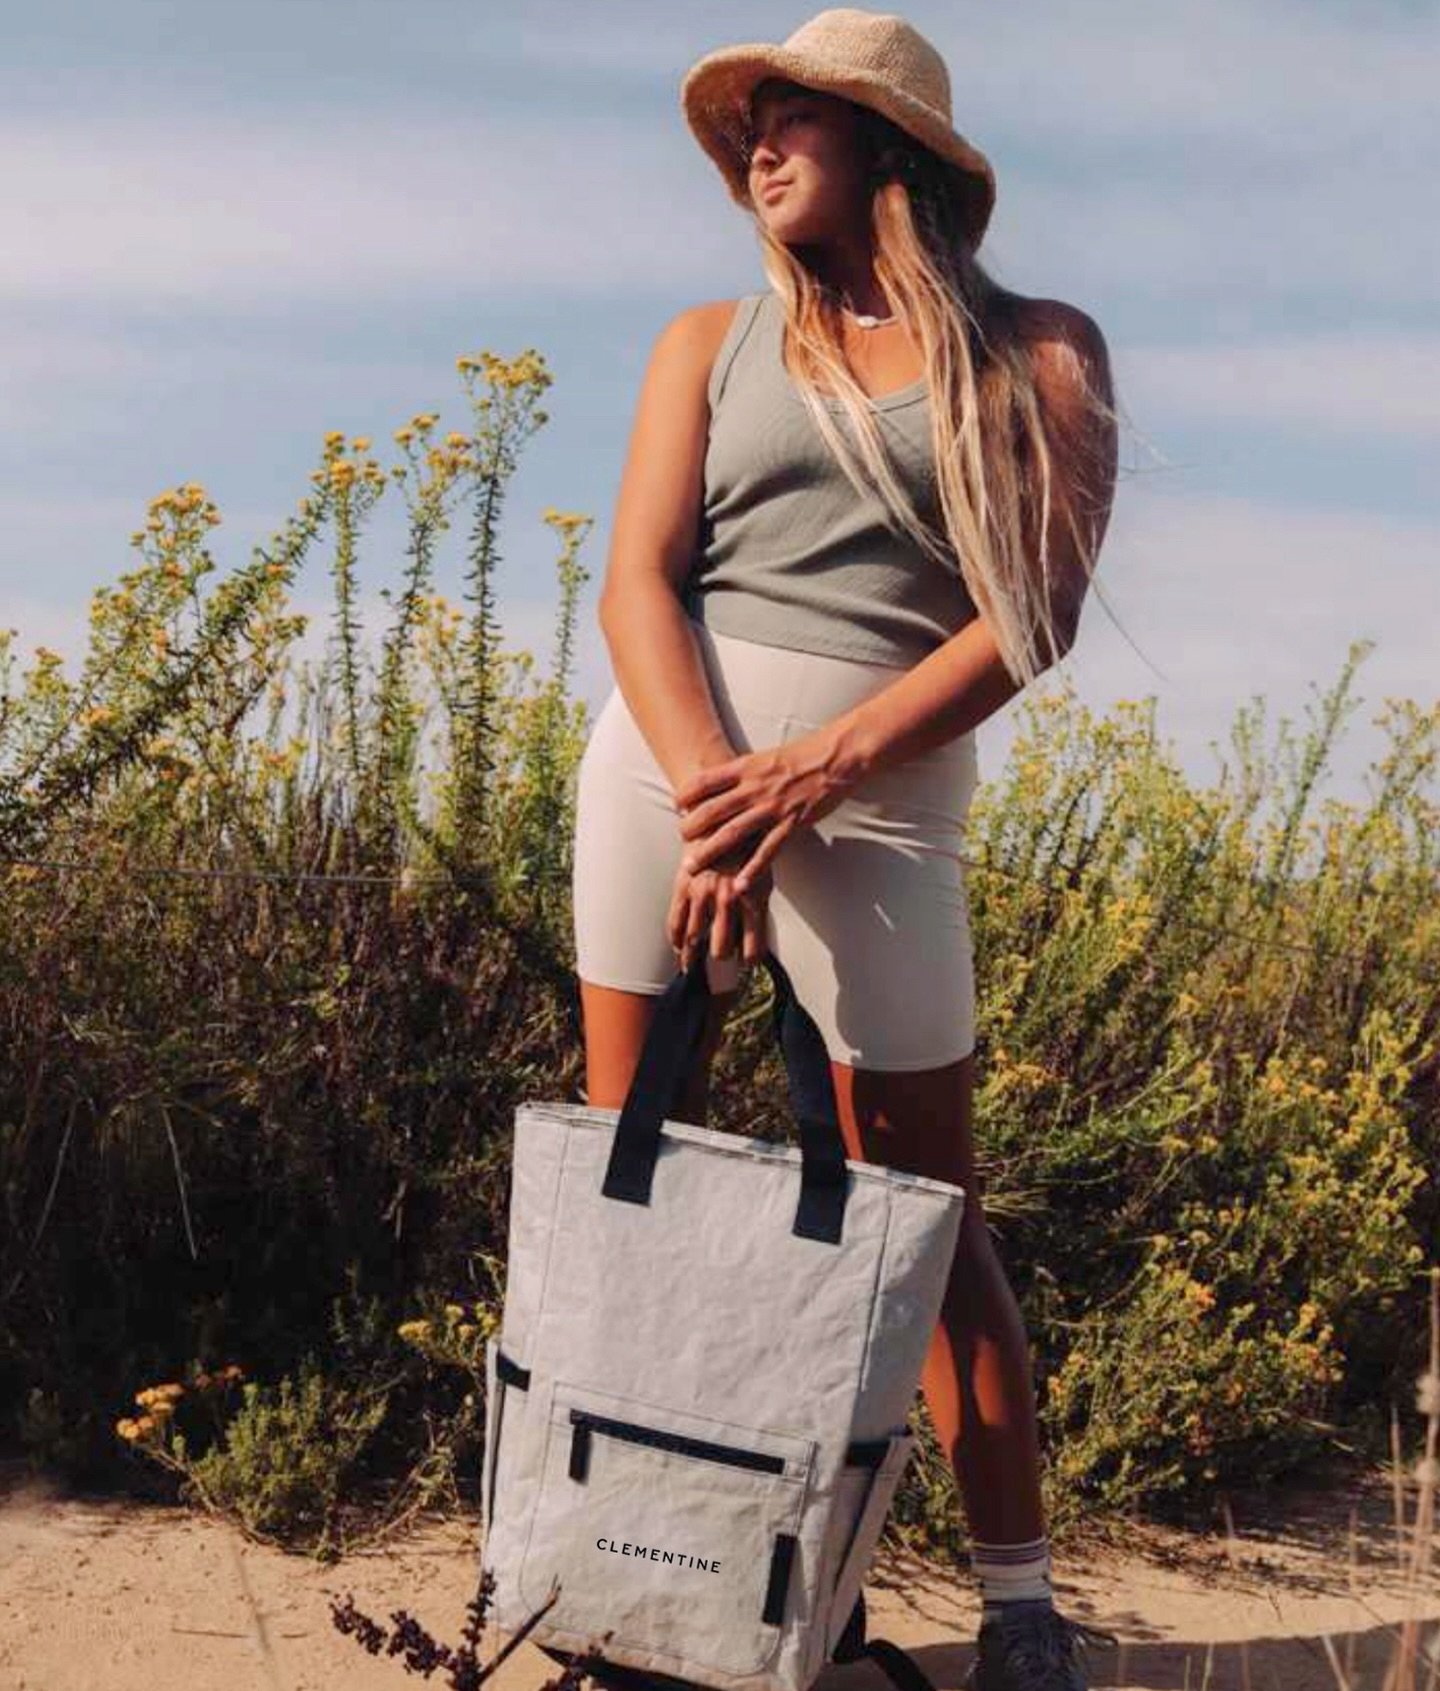 Summer is calling, and Clementine Promotions has the answer! Our custom totes are designed to go wherever your adventures take you, especially to the beach. Perfect for summer beach parties, these totes will carry your essentials in style. Let&rsquo;